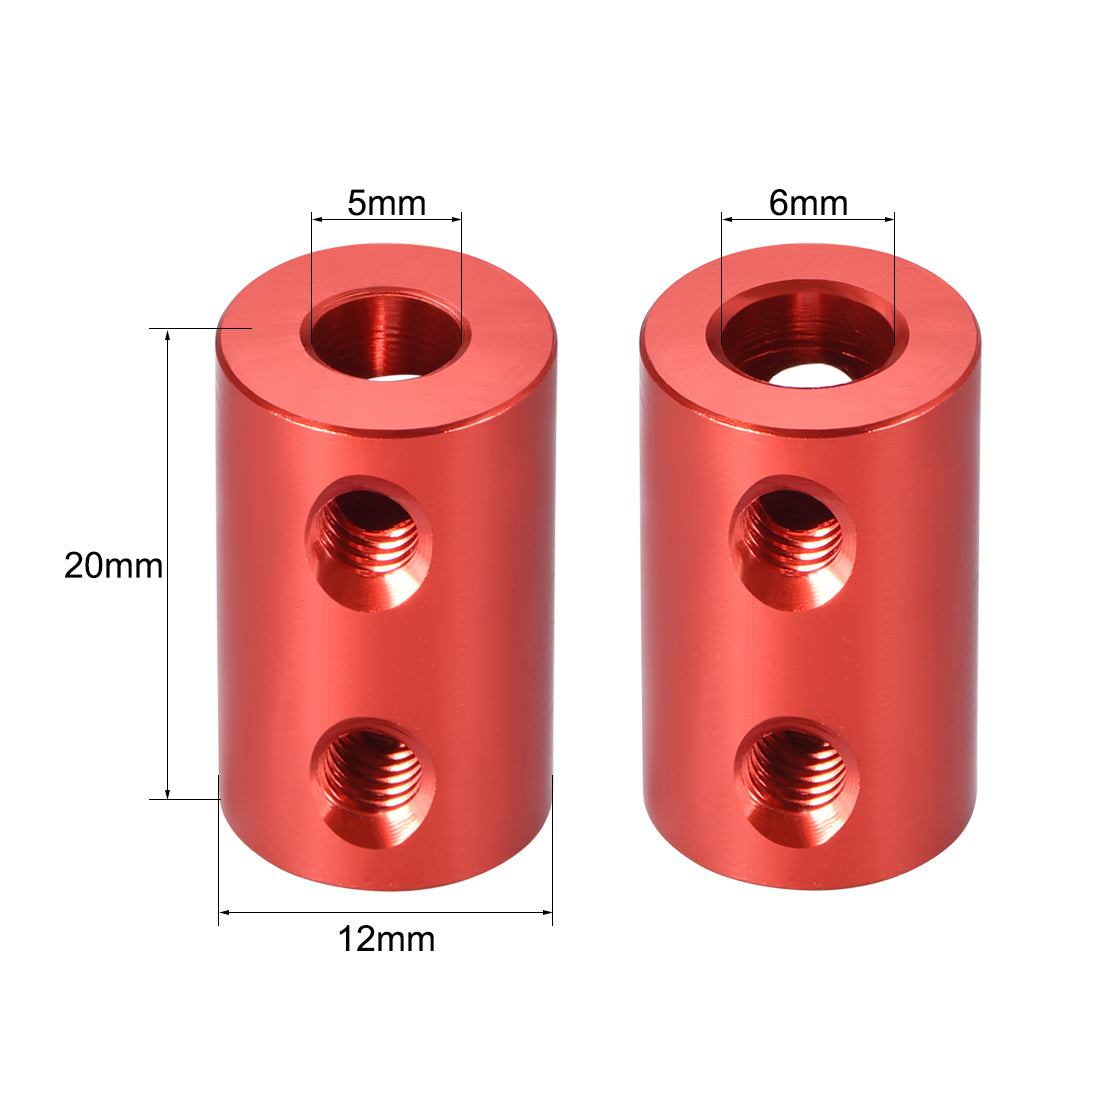 uxcell Uxcell Shaft Coupling 5mm to 6mm Bore L20xD12 Robot Motor Wheel Rigid Coupler Connector Red